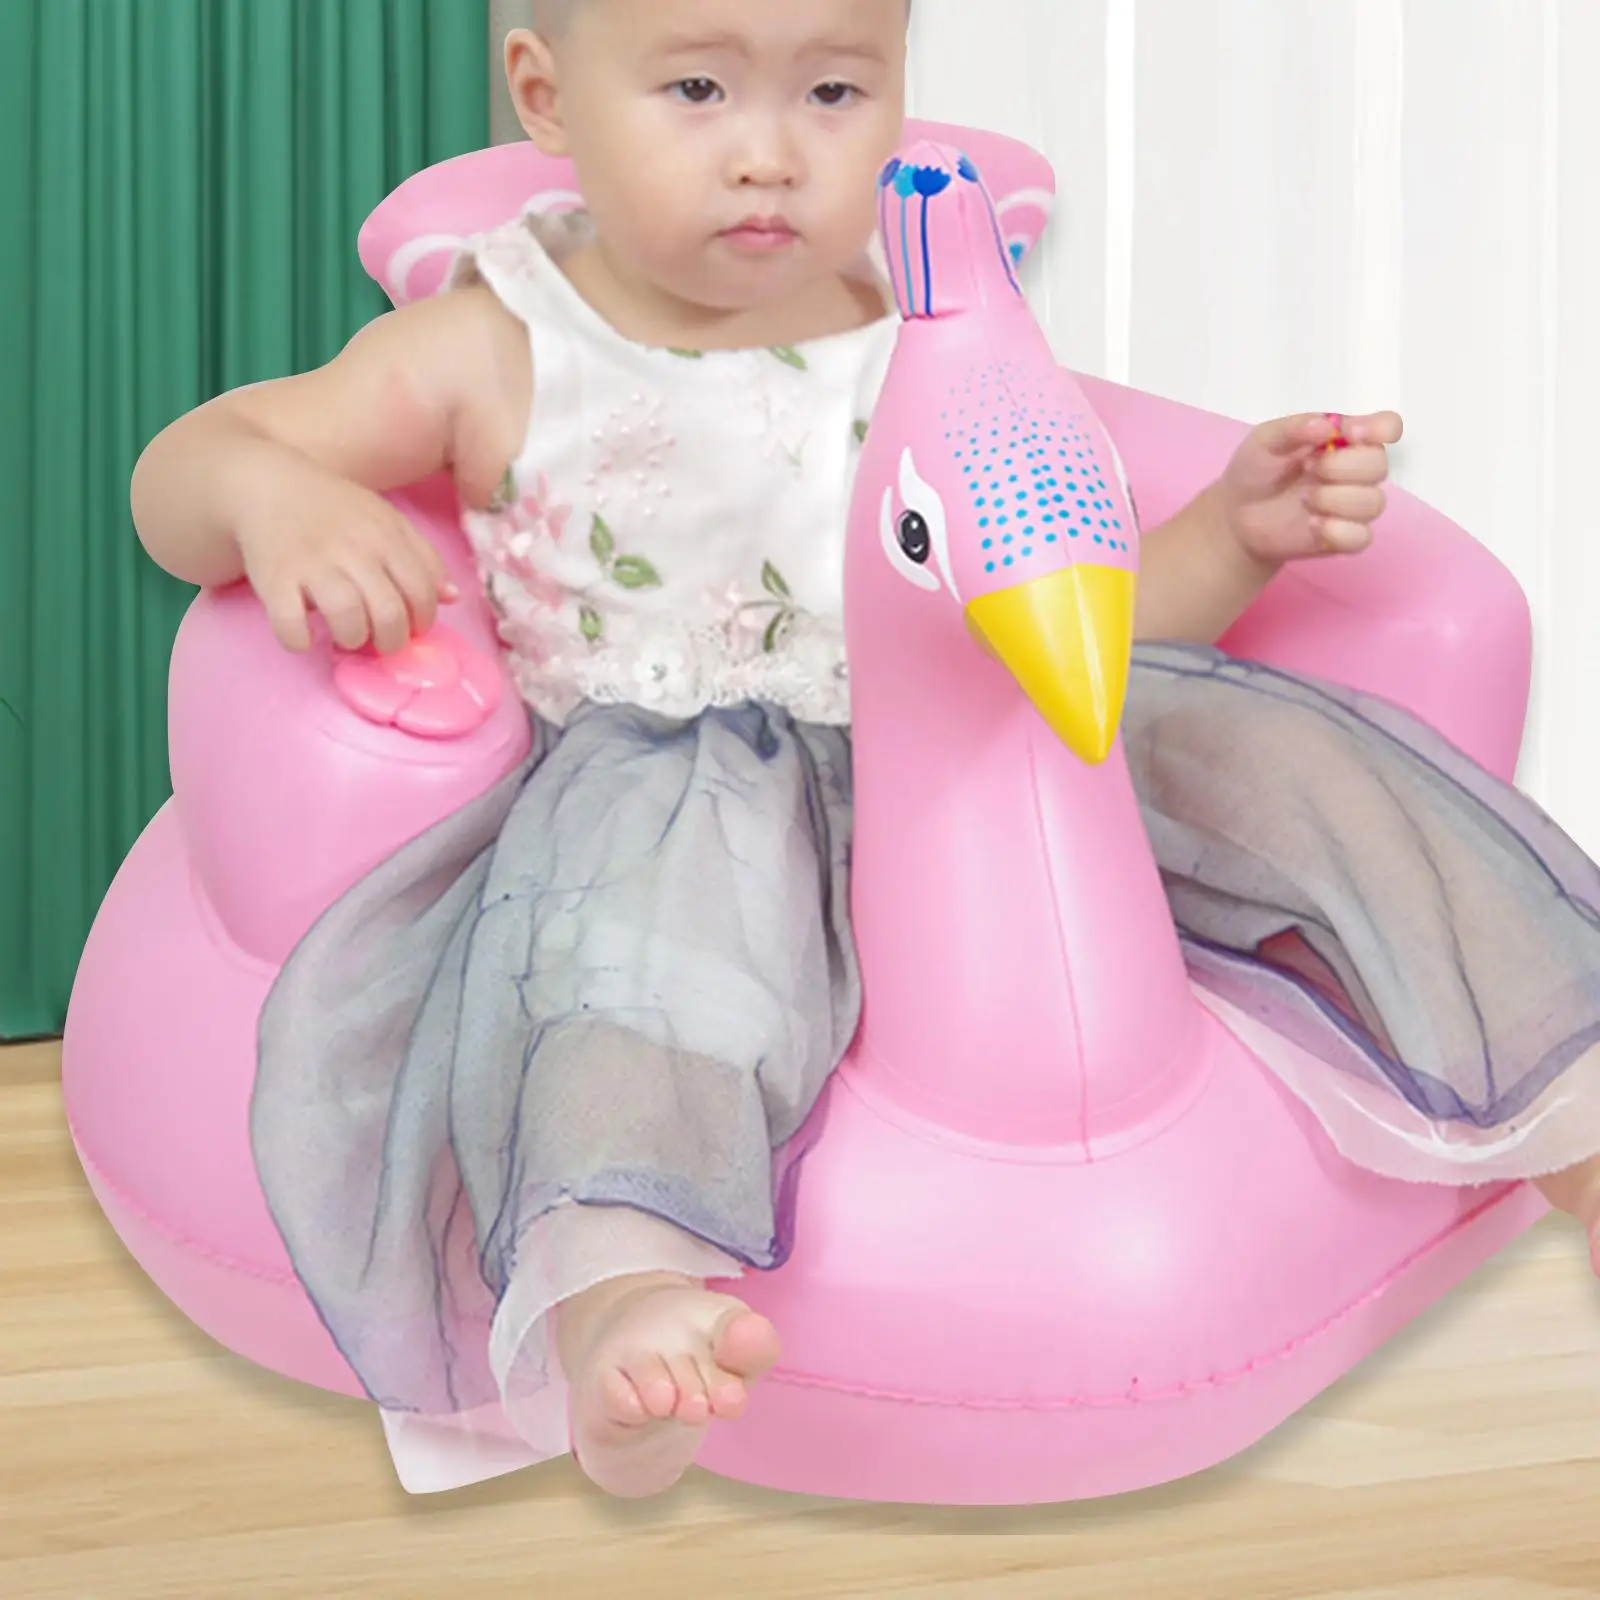 Inflatable Baby Seat for Sitting up Toddler Chair for Sitting up 3 Months and up baby Seat Inflation Baby Chair Seat